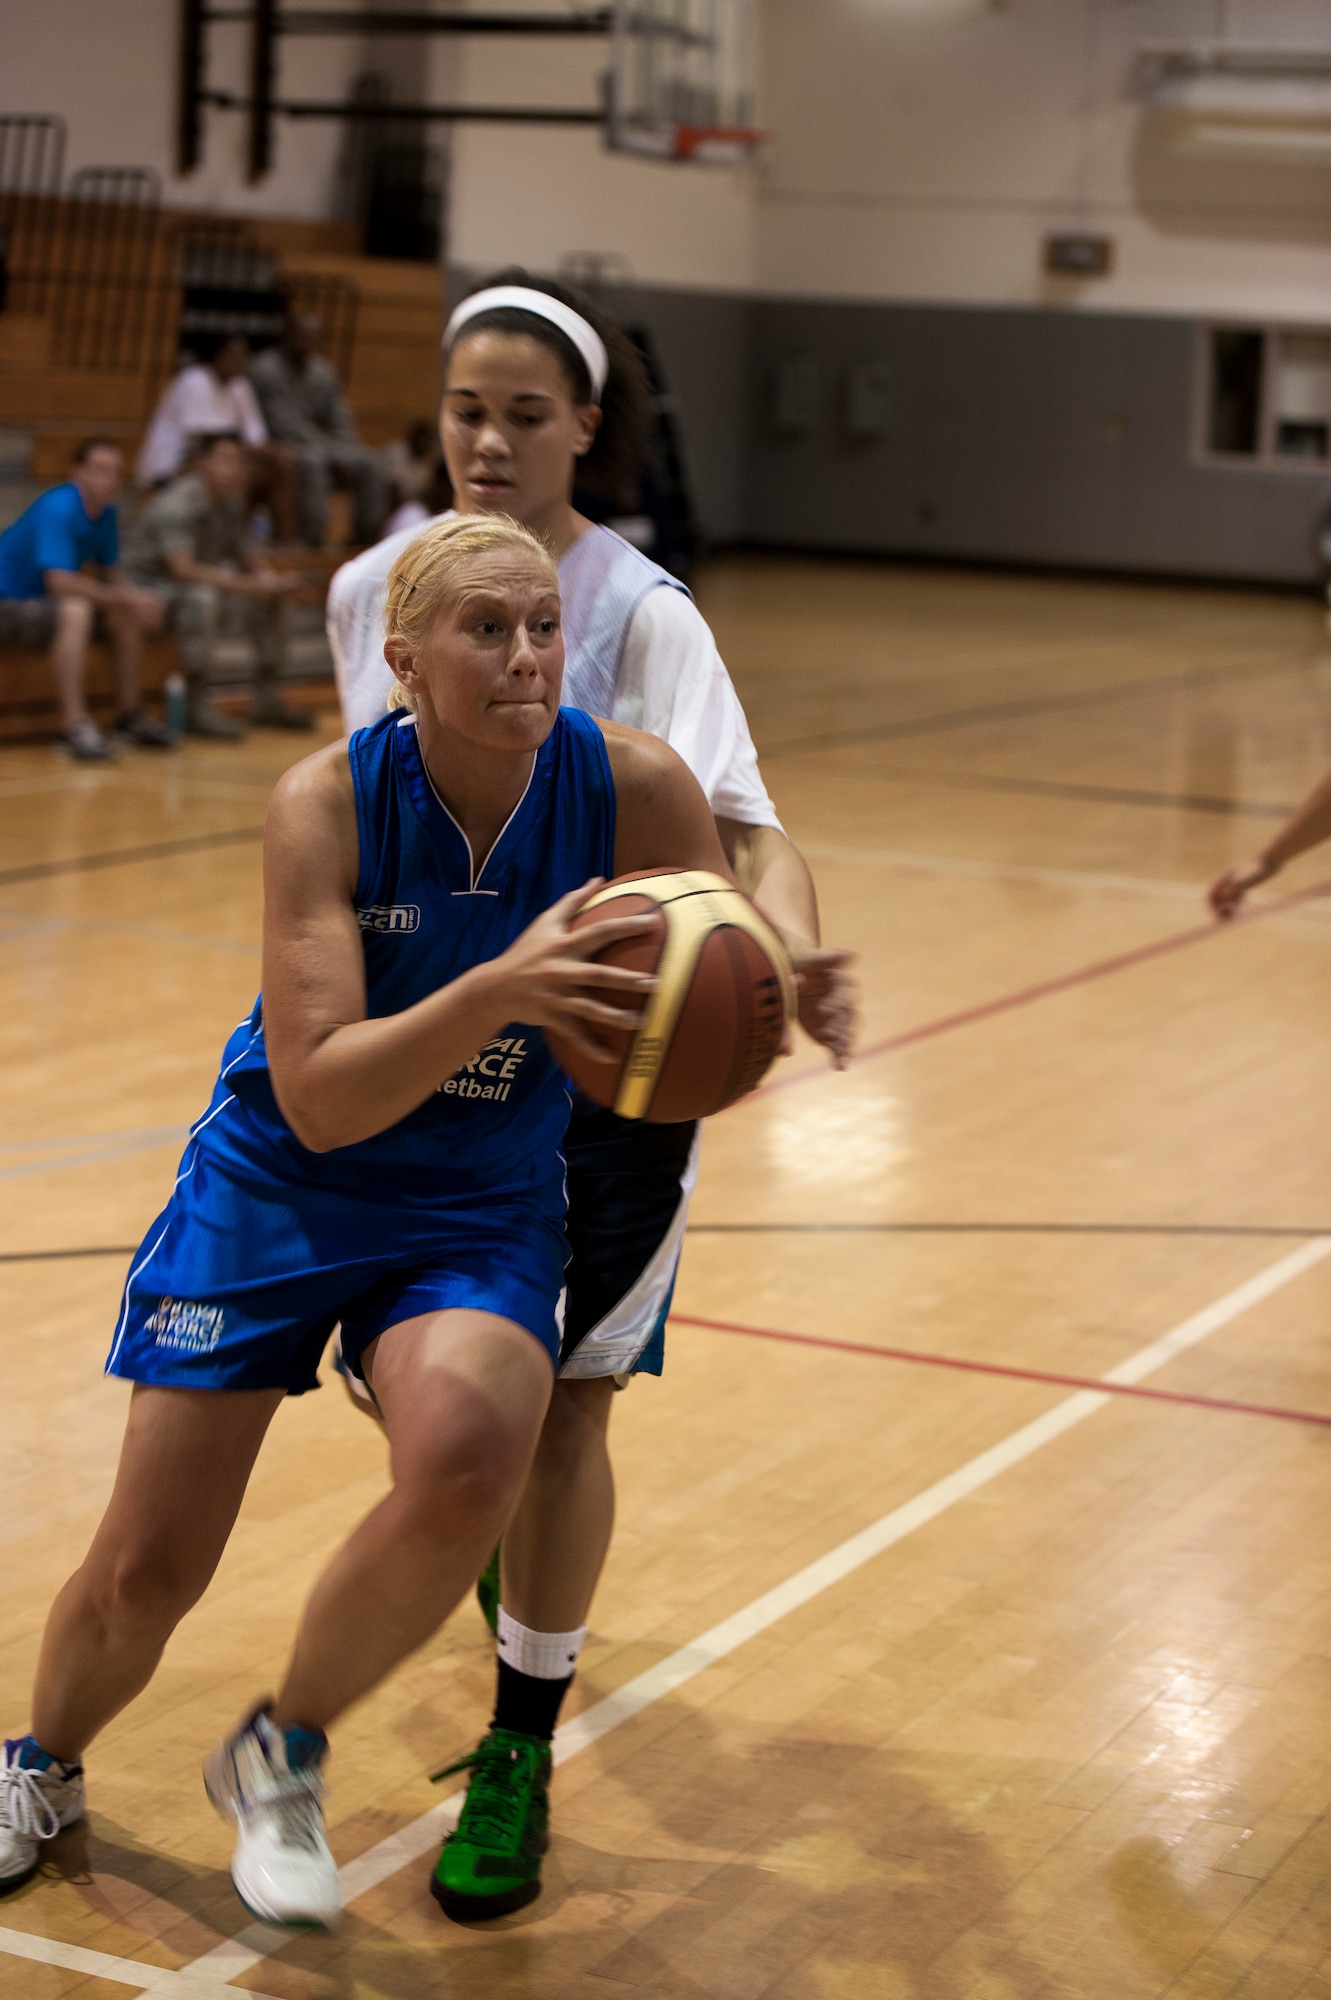 U.K. Royal Air Force Cpl. Emma Fare, a RAF team basketball player, dribbles past a Hurlburt Field defender during a scrimmage at the Aderholt Gym on Hurlburt Field, Fla., June 19, 2012. The RAF women's basketball team had six players with them for the two-week training camp. (U.S. Air Force photo by Airman 1st Class Christopher Williams) (RELEASED)